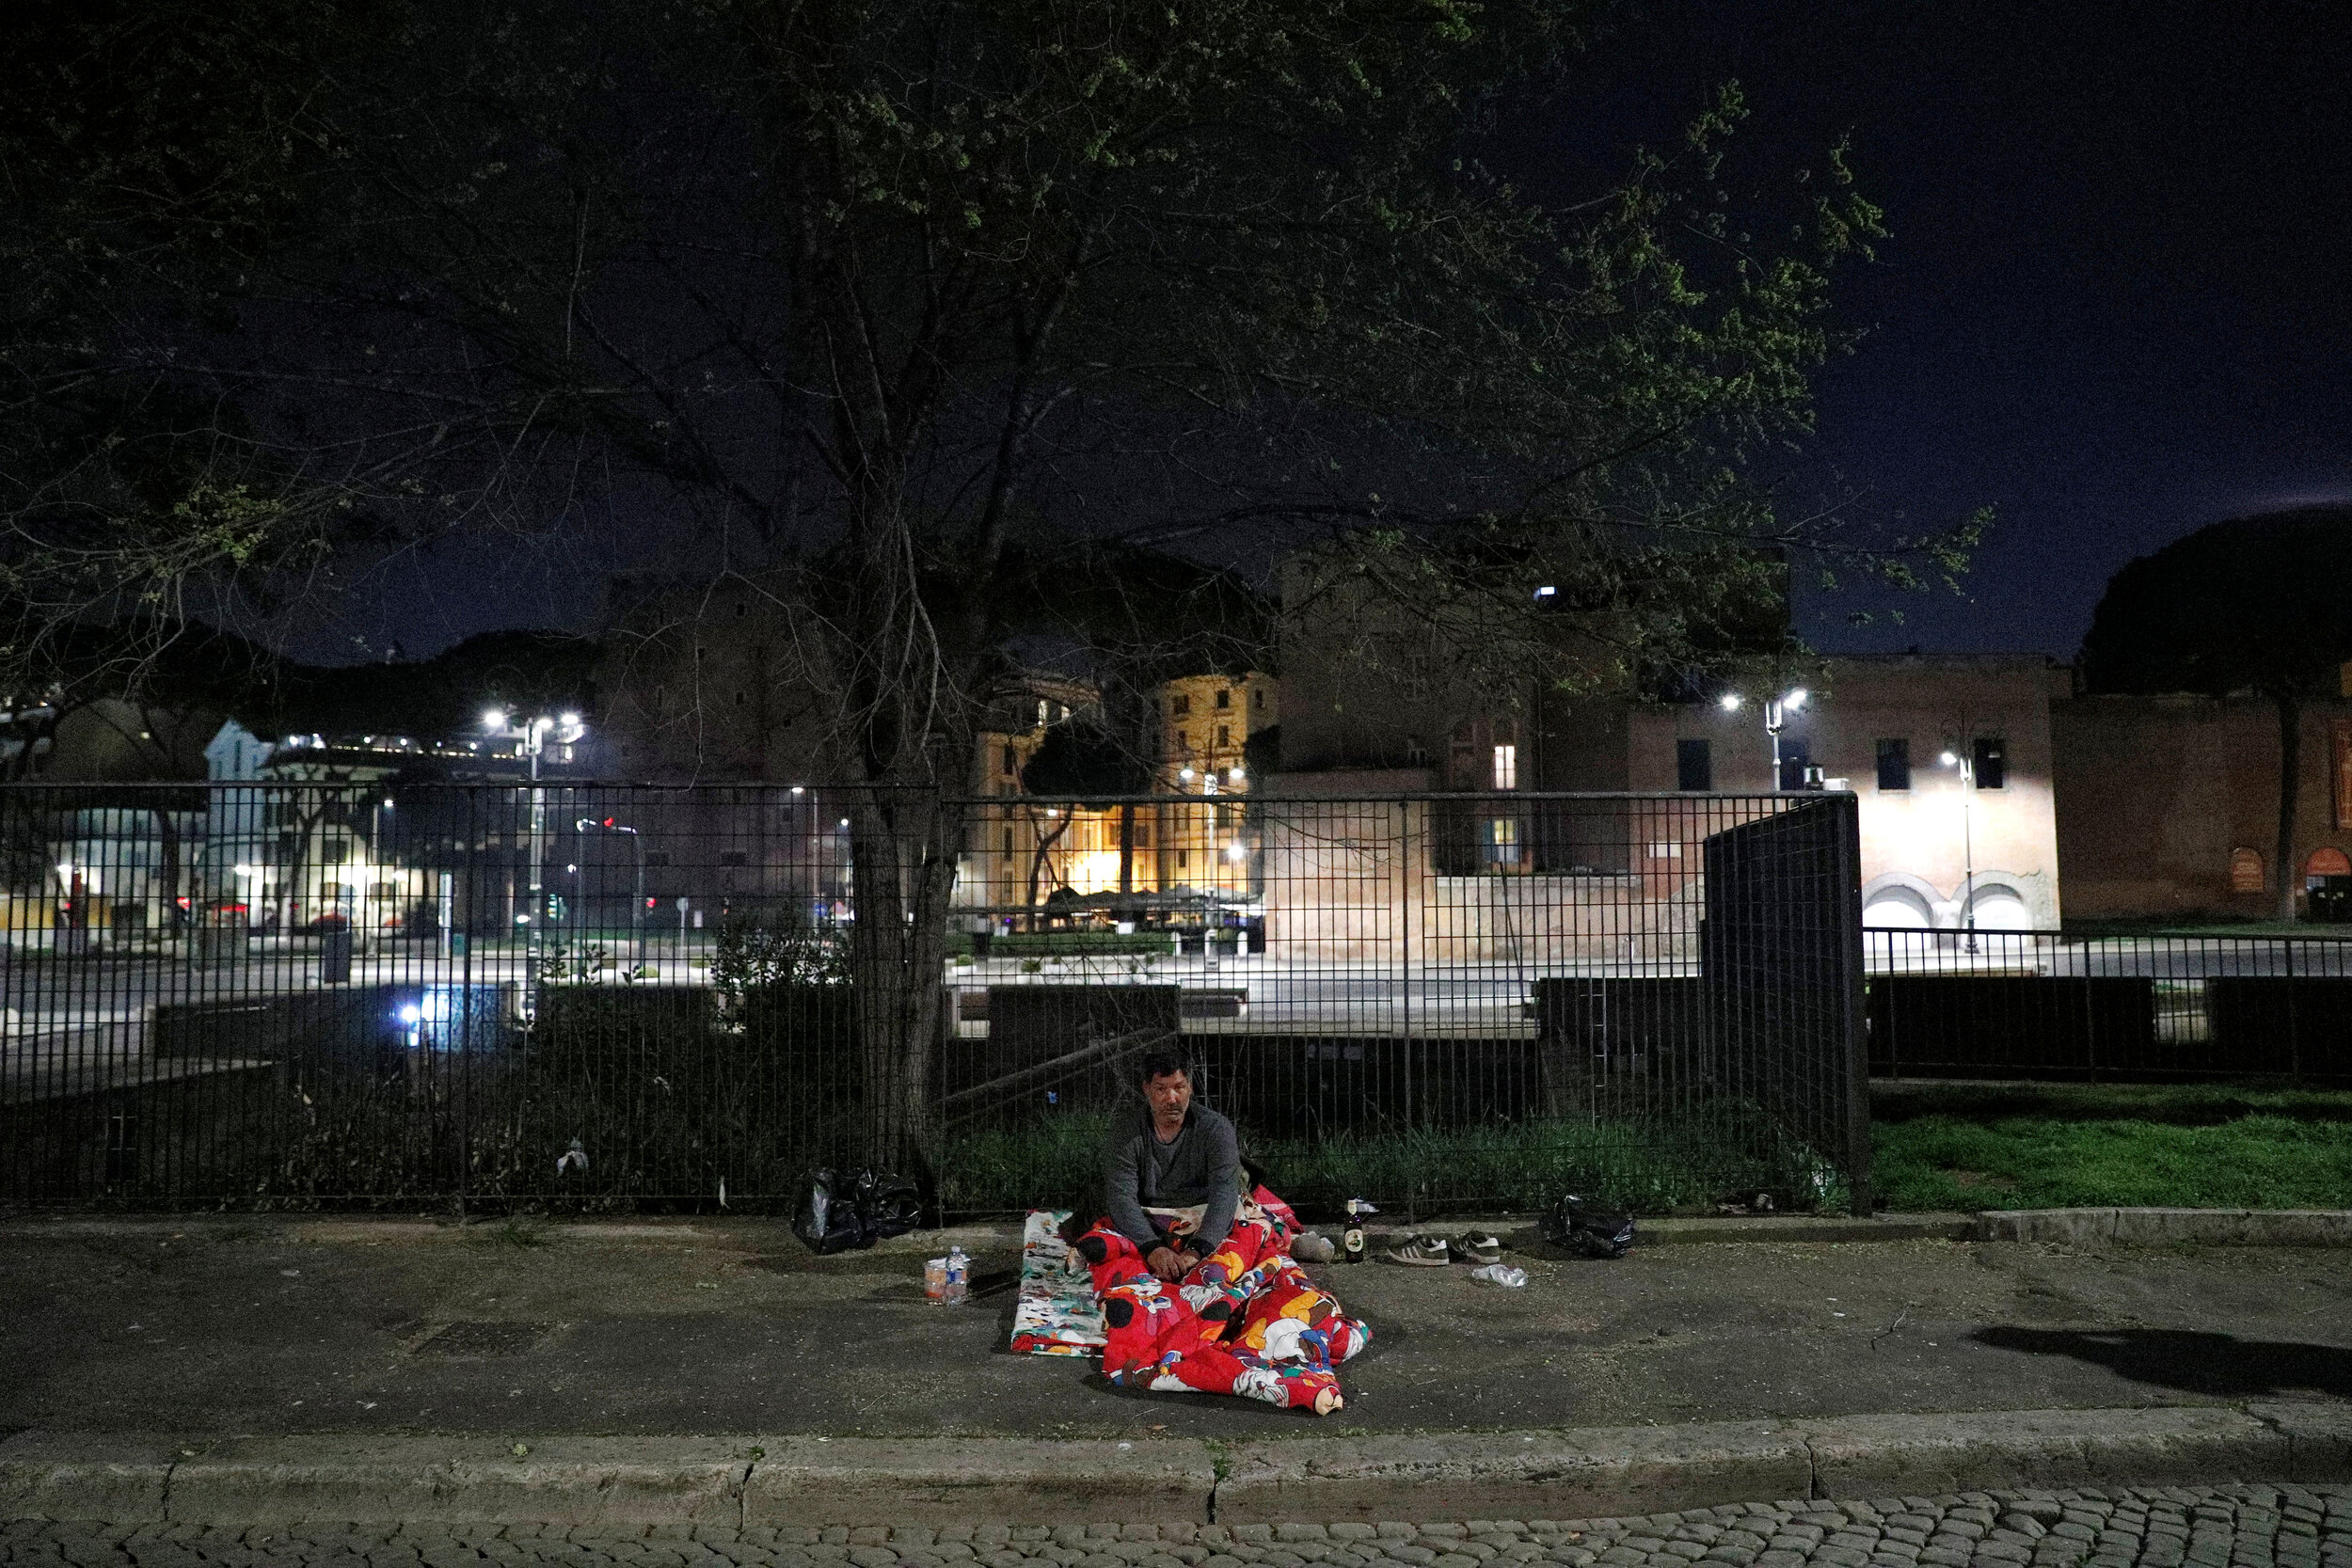  A homeless person sits on a pavement in Rome, Italy, March 17, 2020. Since the coronavirus crisis, Red Cross workers have been increasing their daily activities to meet the growing needs of the homeless in Rome.  